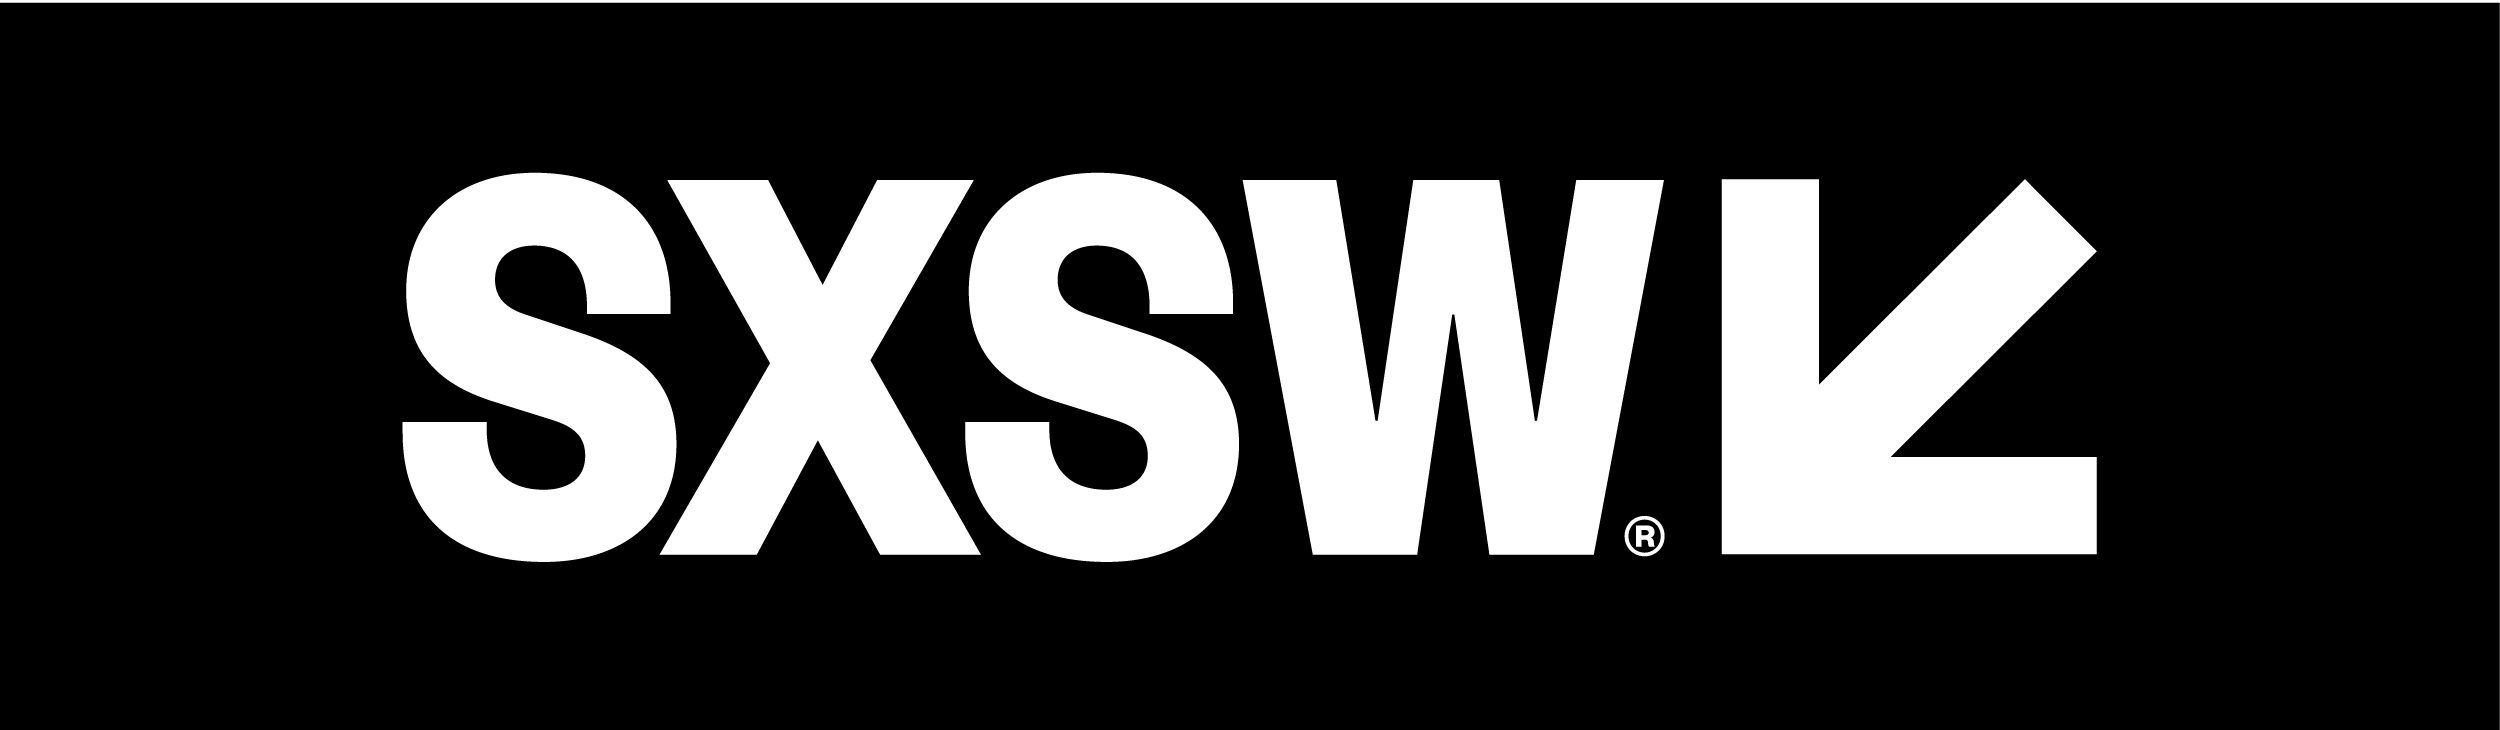 SXSW MUSIC FESTIVAL - SECOND ROUND OF SHOWCASING ARTISTS ANNOUNCED